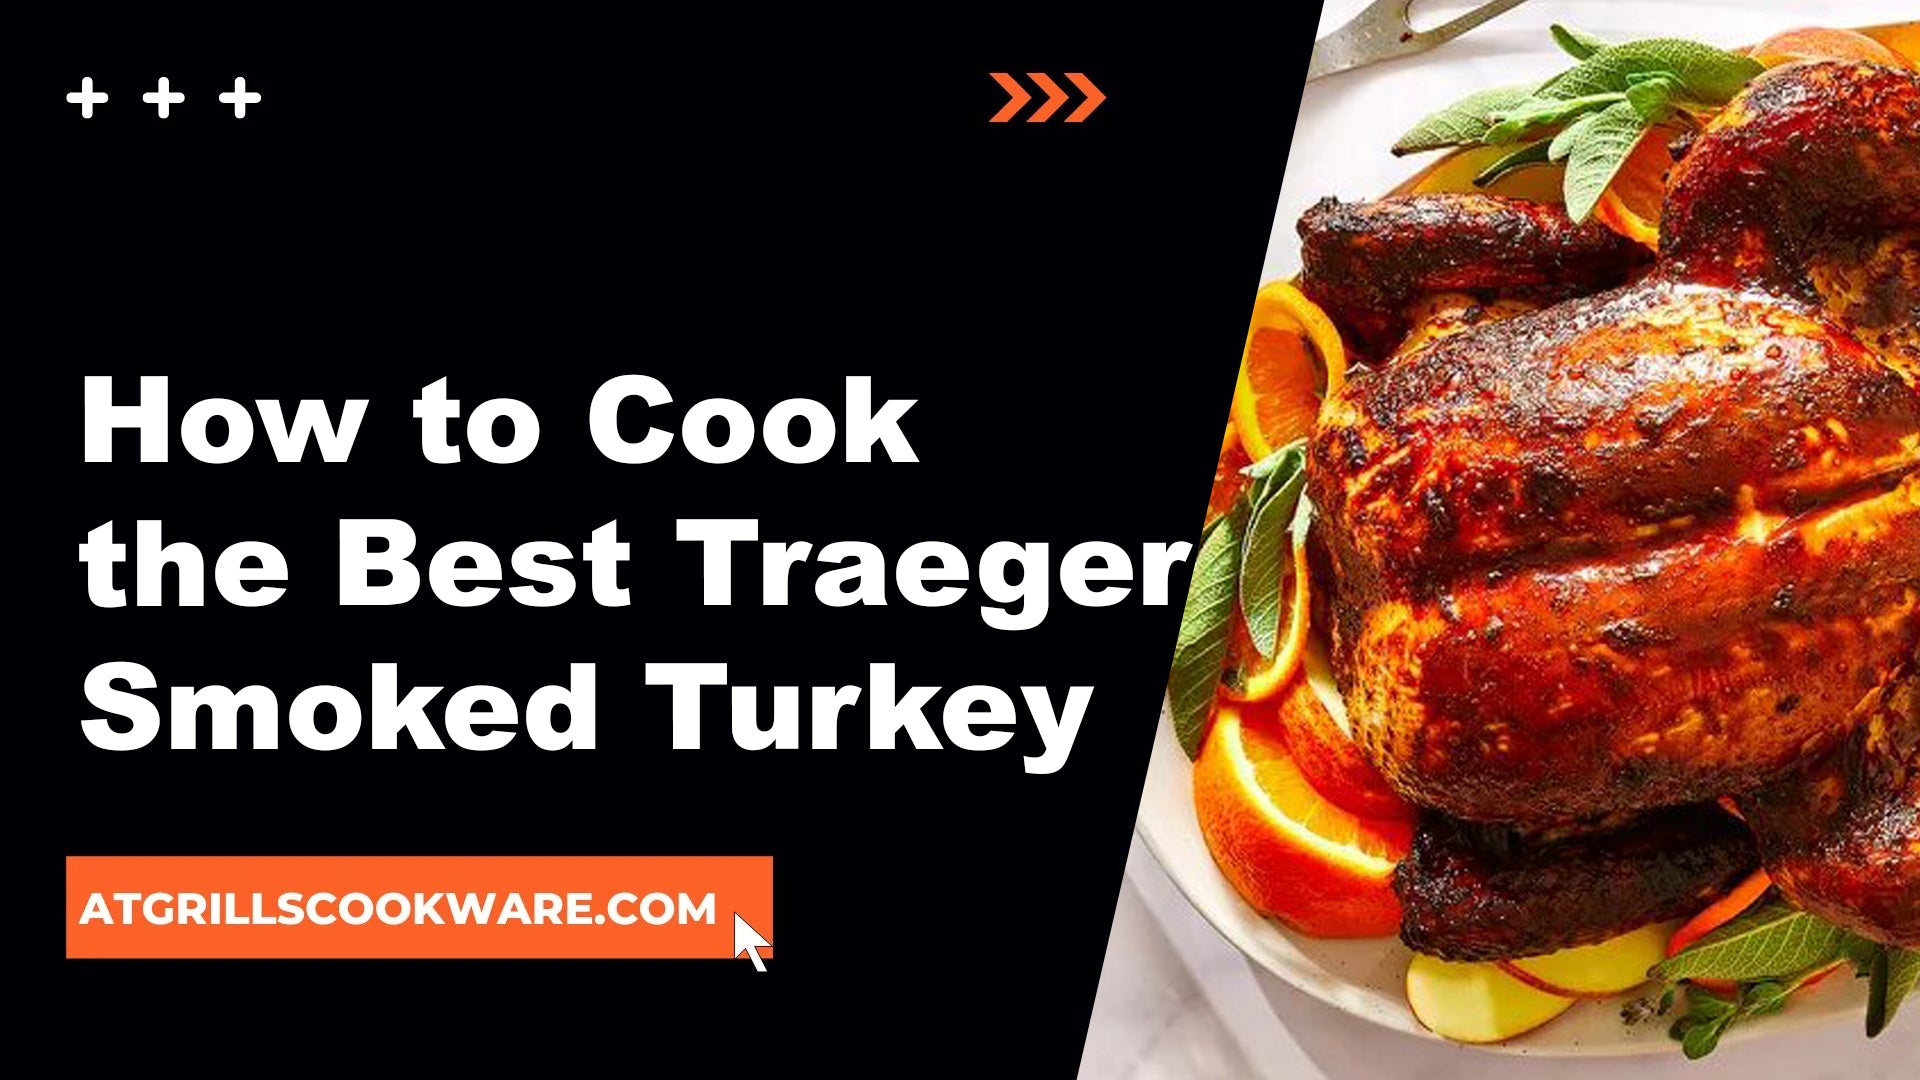 How to Cook the Best Traeger Smoked Turkey